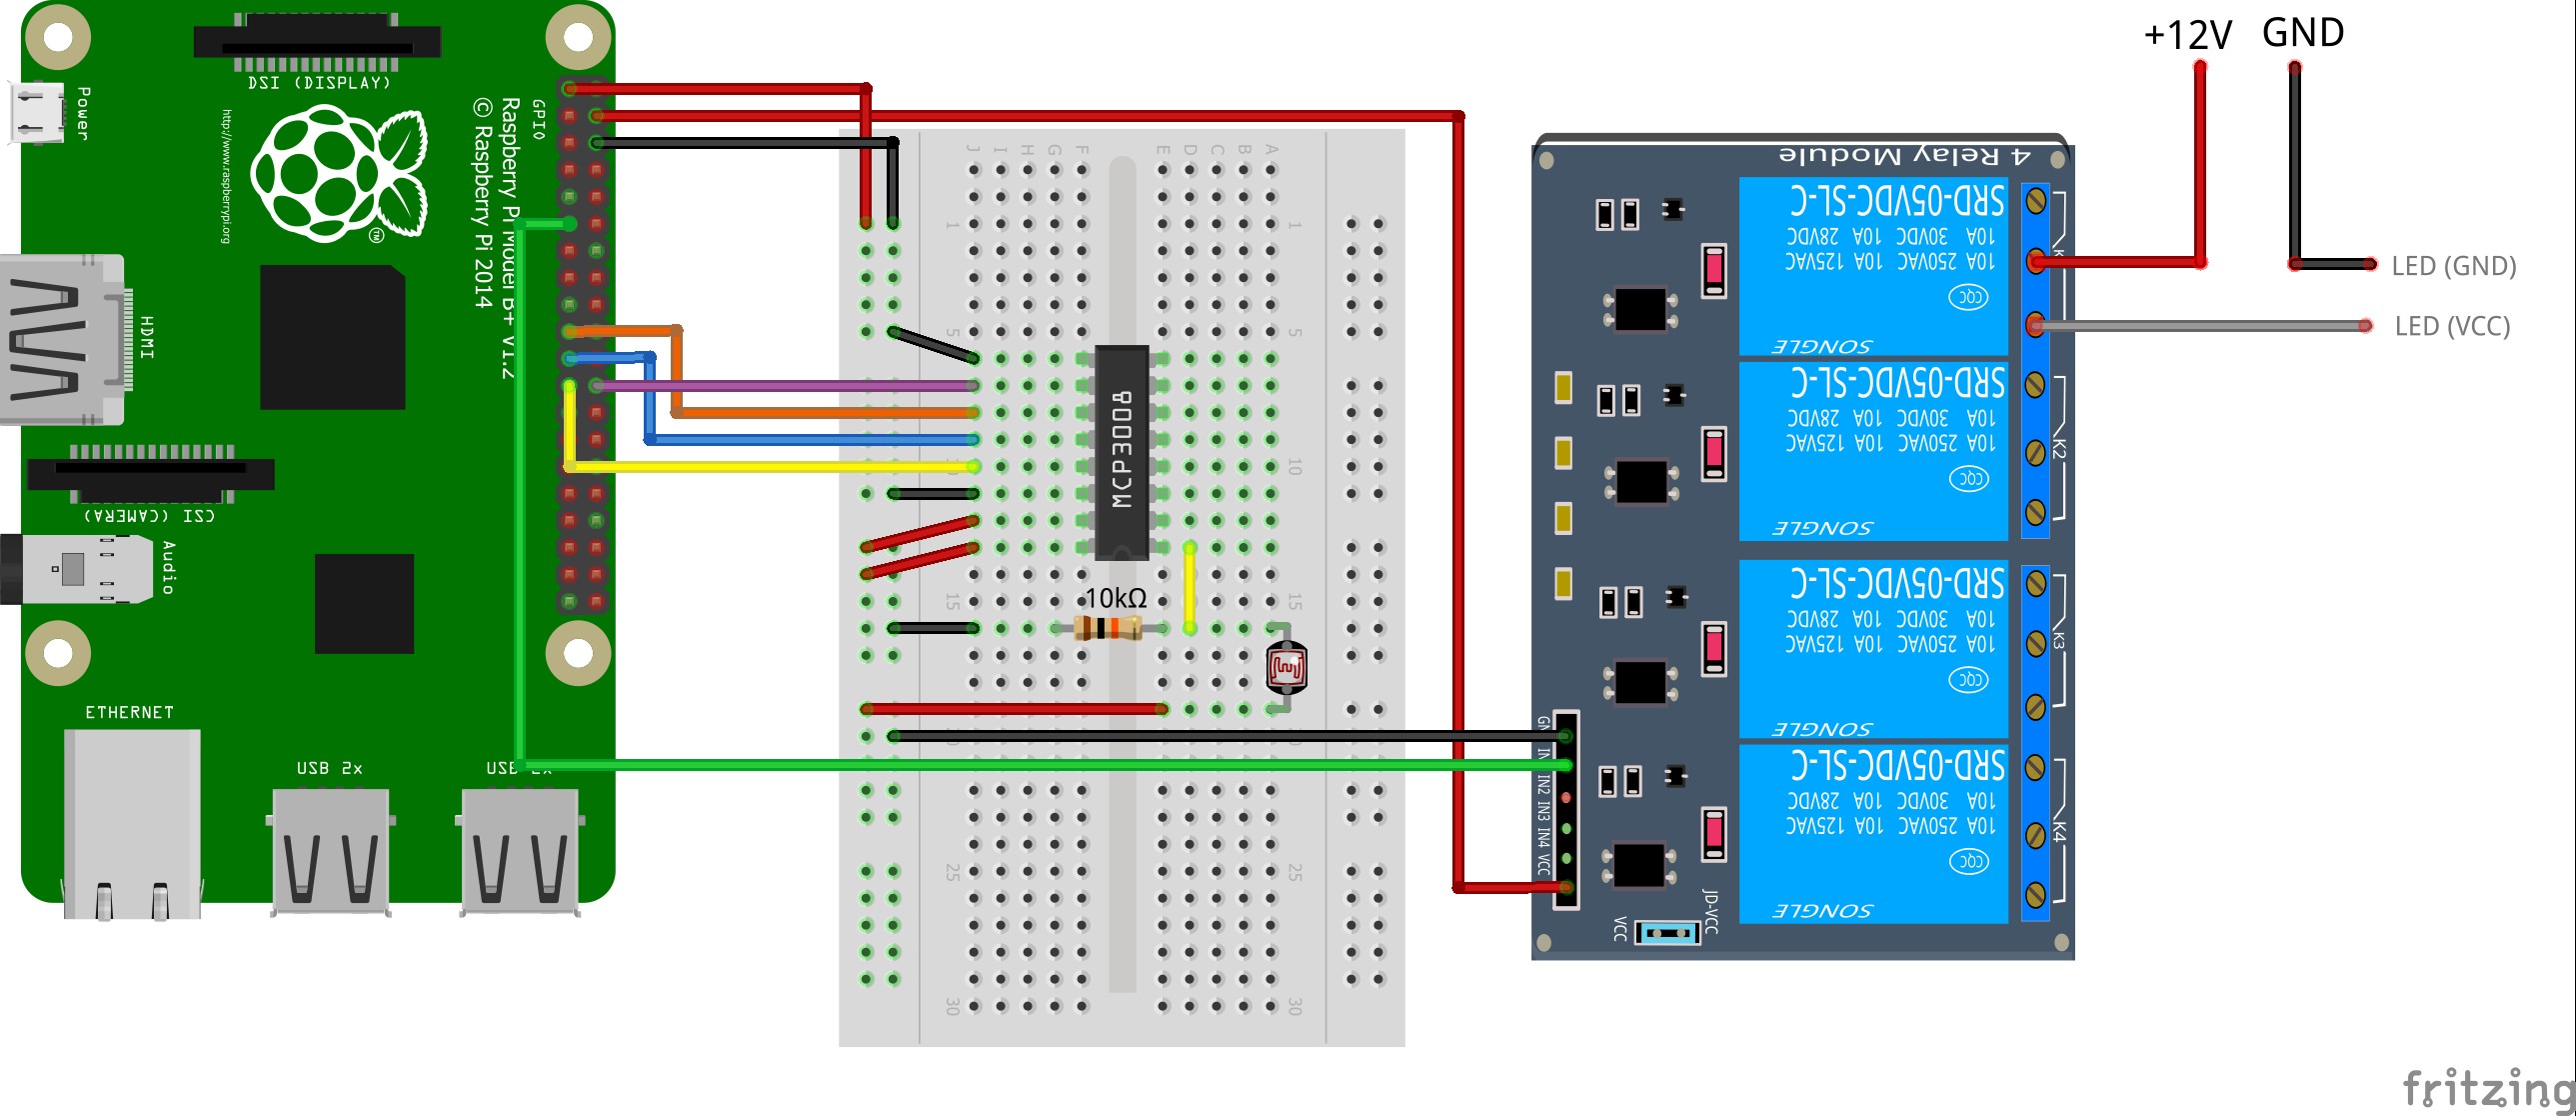 e of the 8 channels is used for the light sensor channel 0 We connect this via a pull up resistor as shown in the figure We also connect the relay